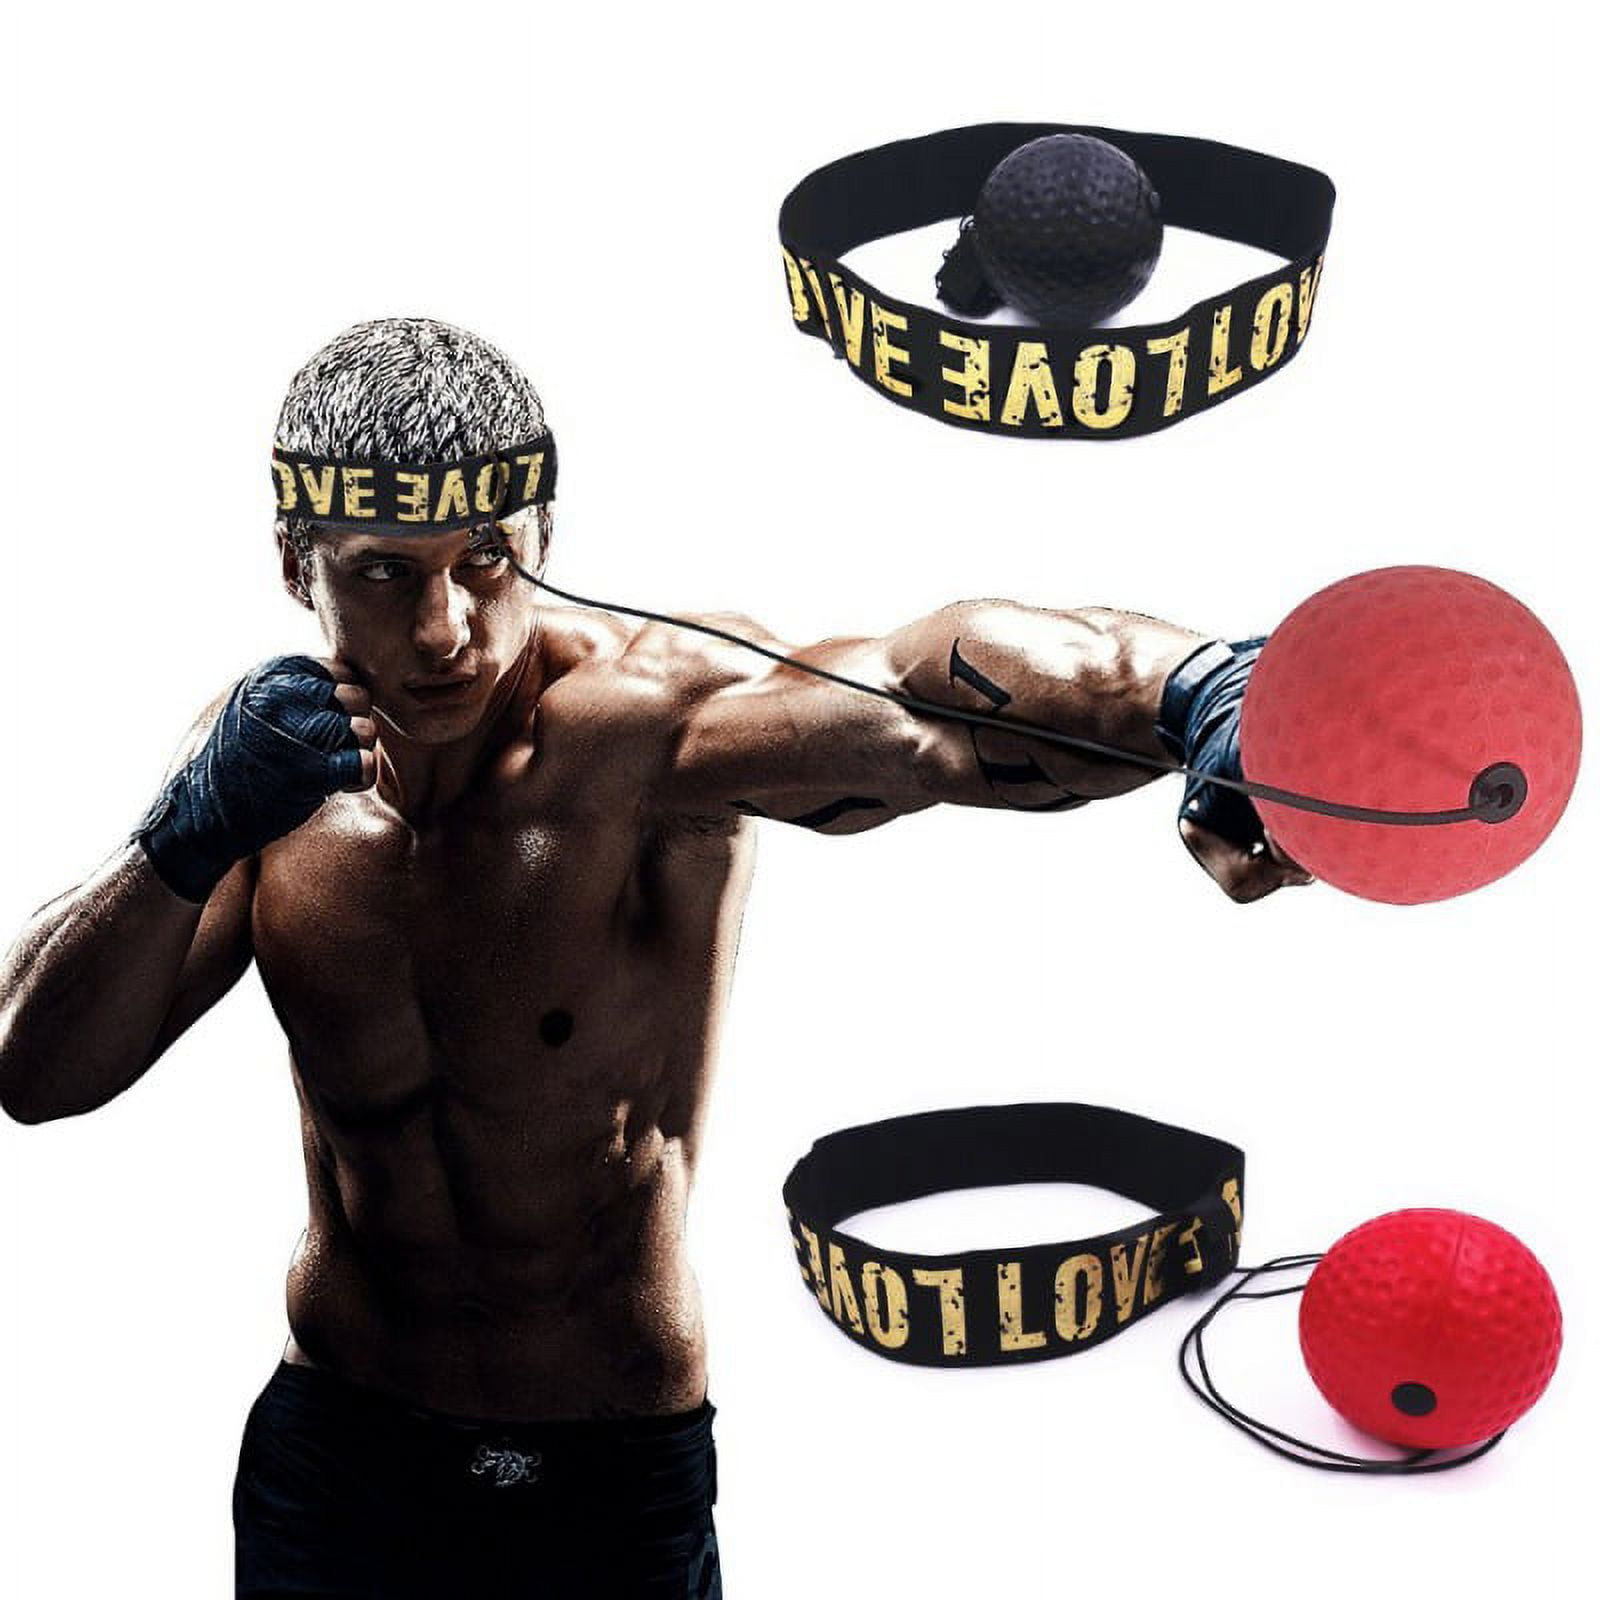  Boxing Reflex Ball for Adults and Kids - React Reflex Balls on  String with Headband, Carry Bag and Hand Wraps - Improve Hand Eye  Coordination, Punching Speed, Fight Reaction (4